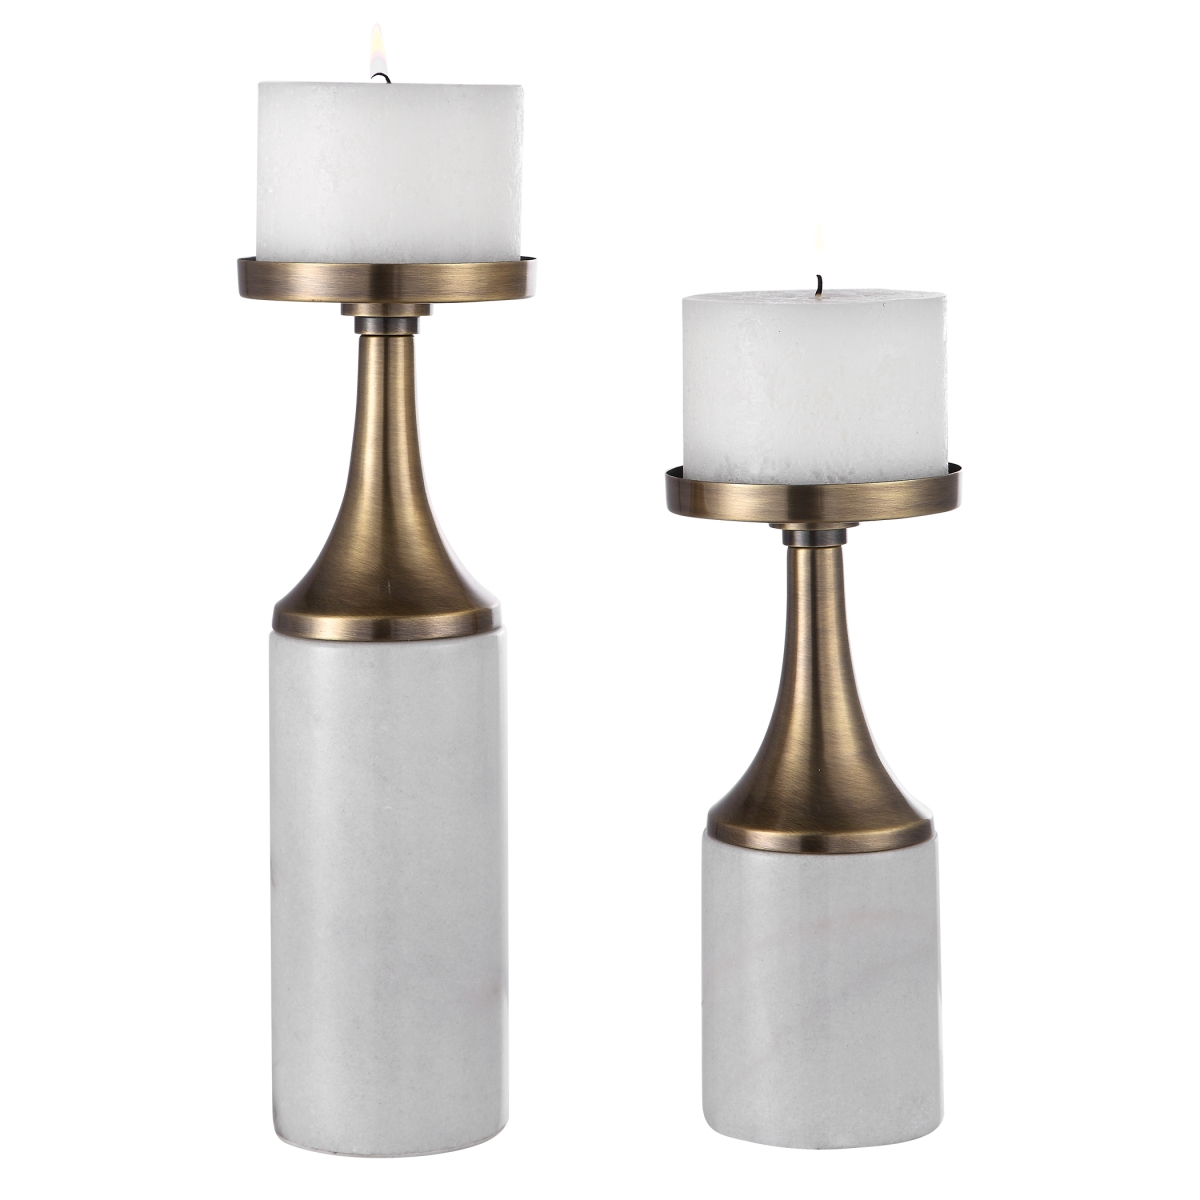 Picture of 212 Main 17546 Castiel Marble Candleholders - Set of 2